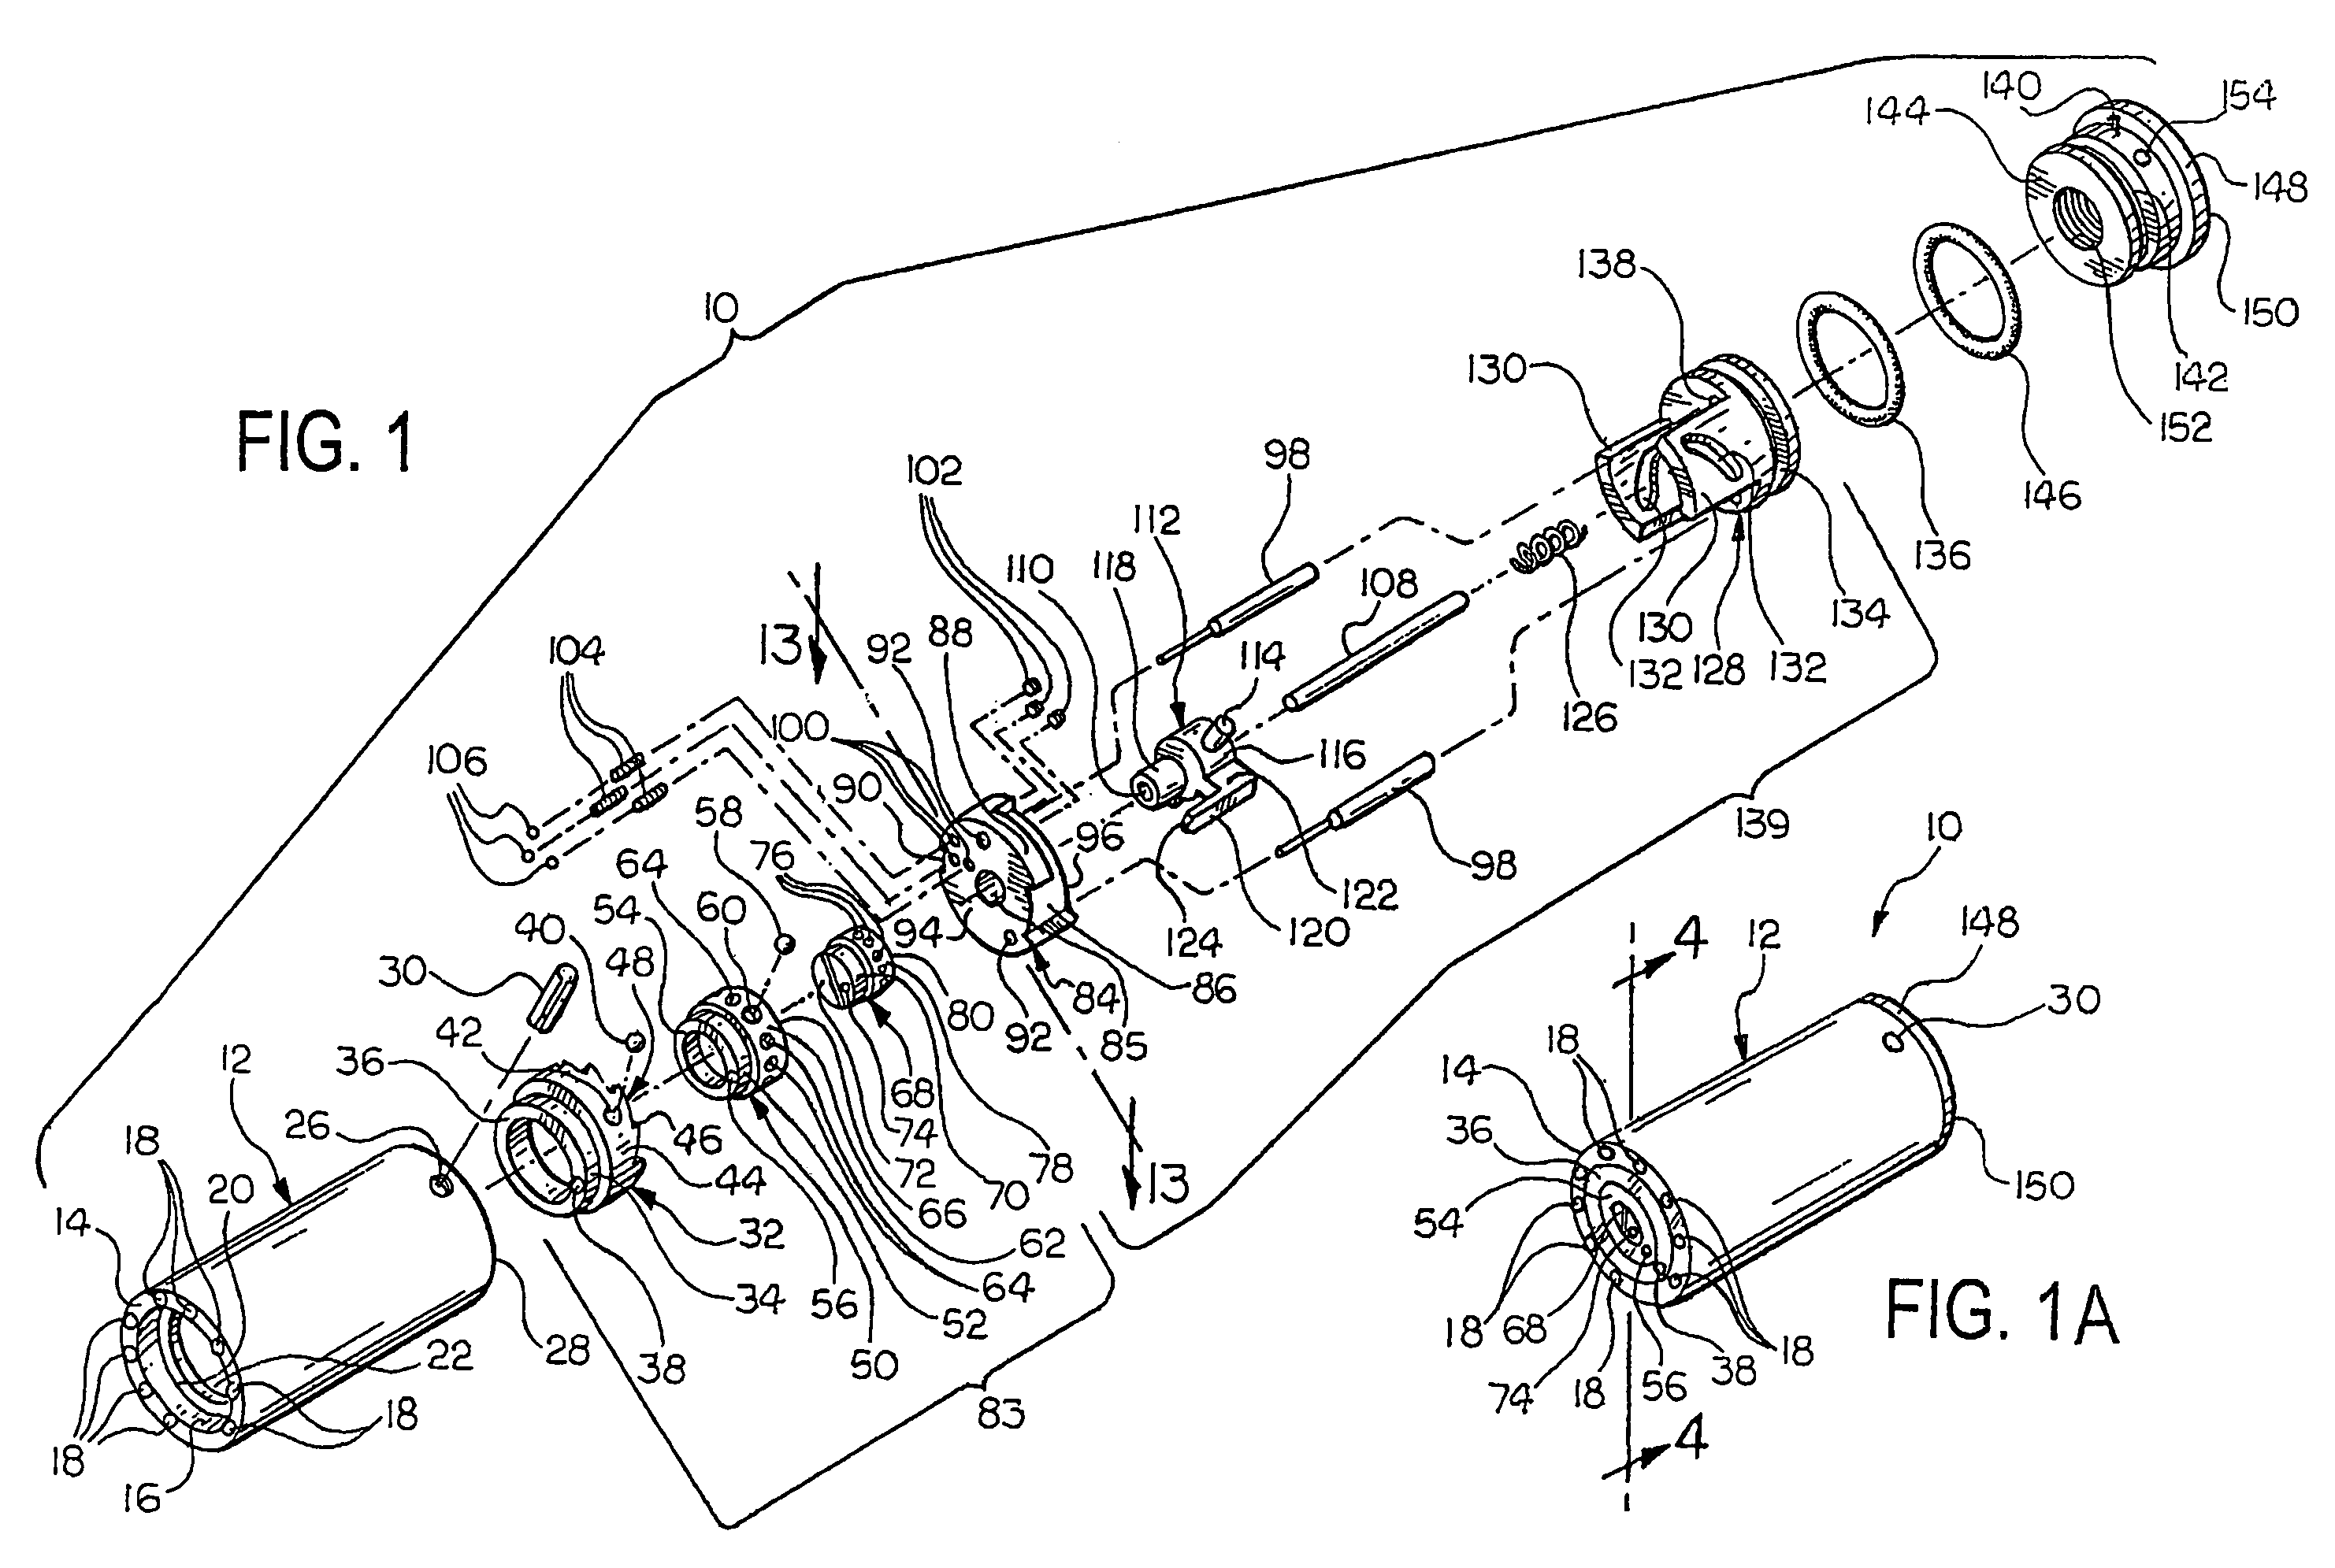 Numbering device for molded or cast parts